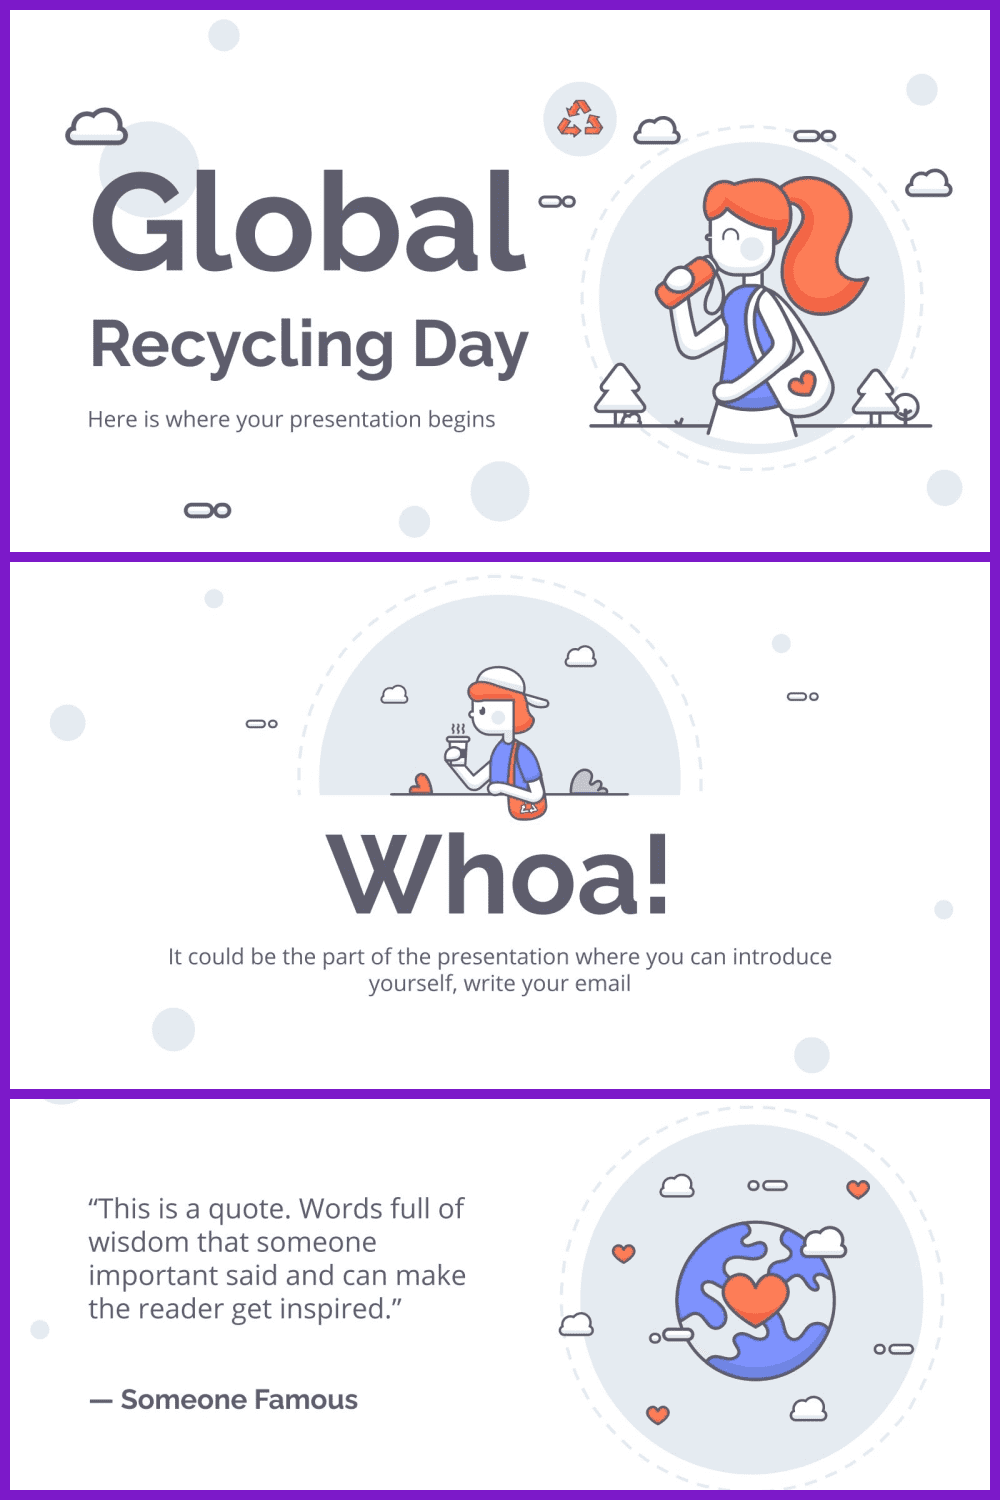 Global Recycling Day.